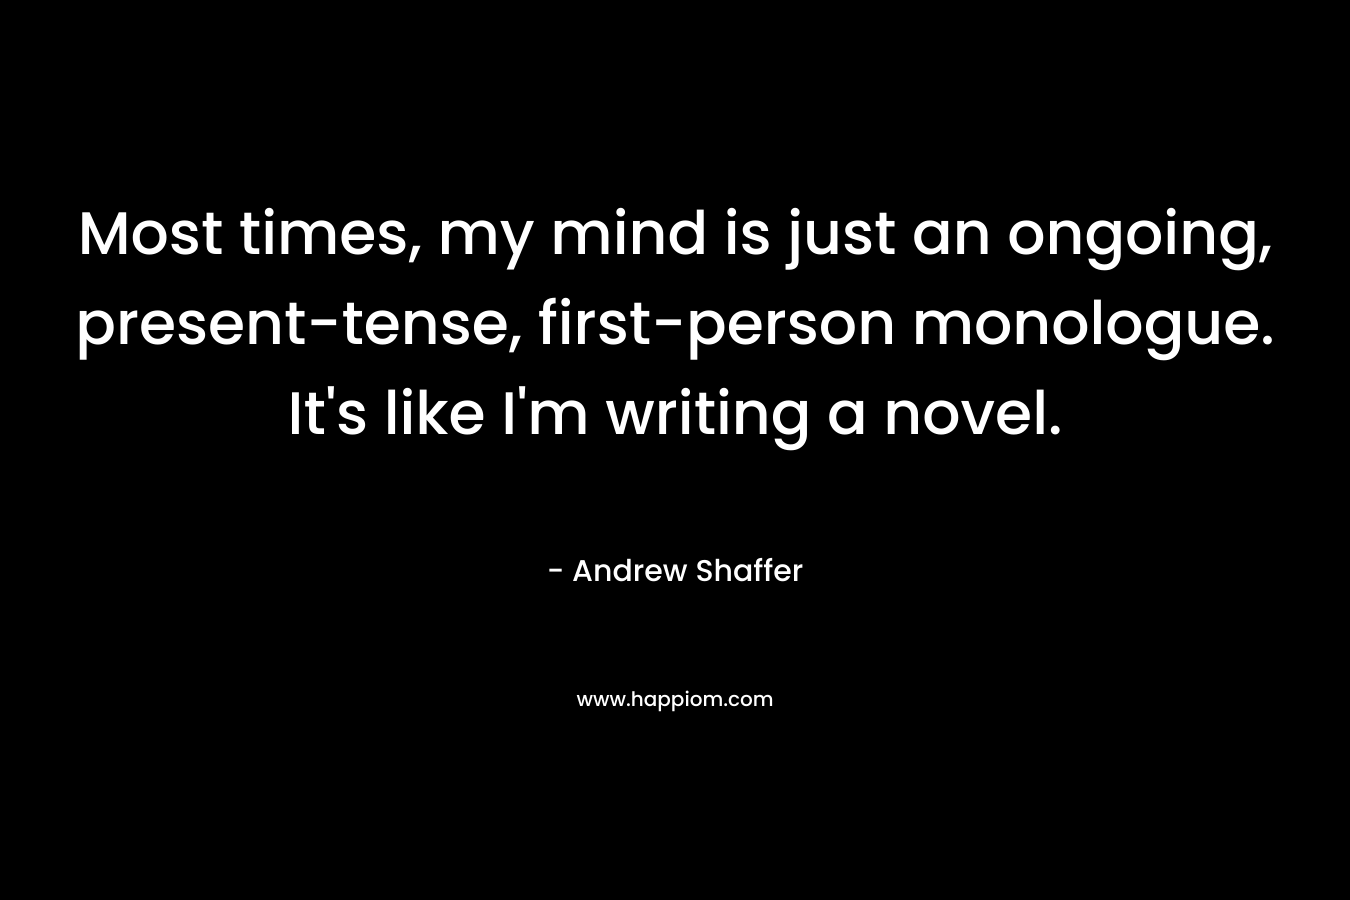 Most times, my mind is just an ongoing, present-tense, first-person monologue. It’s like I’m writing a novel. – Andrew Shaffer